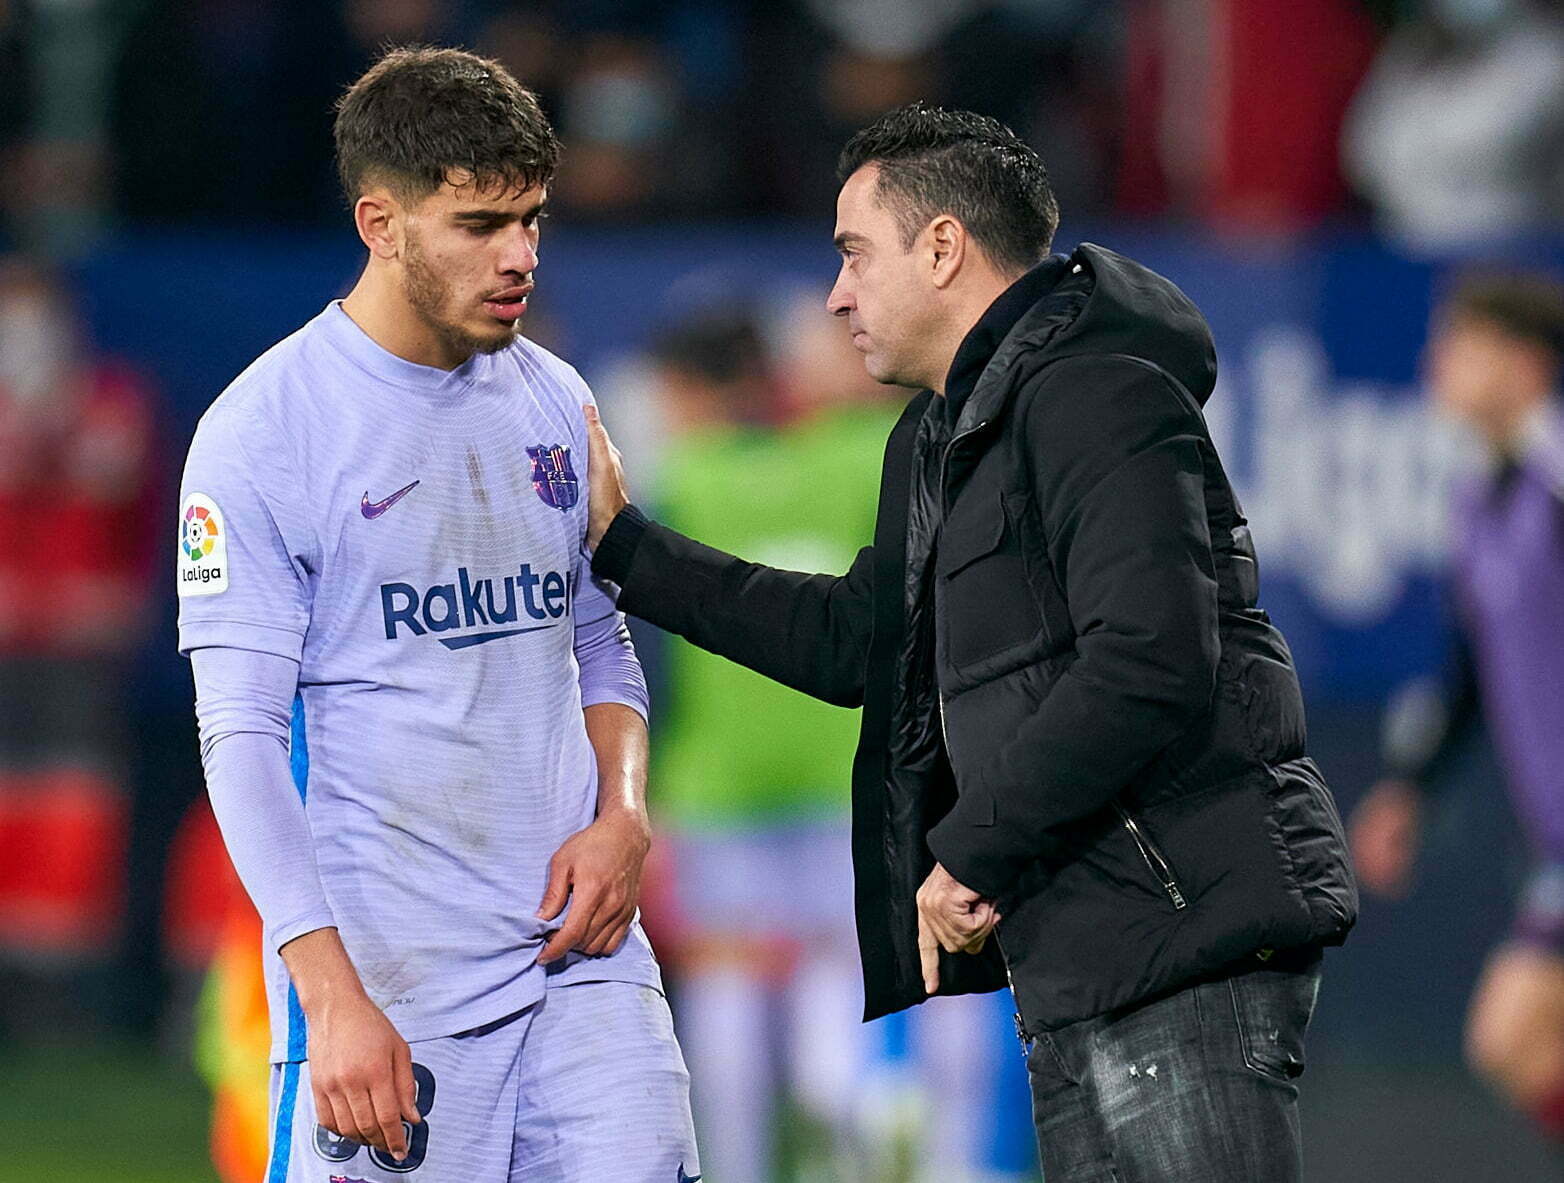 PAMPLONA, SPAIN - DECEMBER 12: Xavi Hernandez, Manager of FC Barcelona gives instructions to Abdessamad Ezzalzouli during the La Liga Santander match between CA Osasuna and FC Barcelona at Estadio El Sadar on December 12, 2021 in Pamplona, Spain. (Photo by Quality Sport Images/Getty Images)